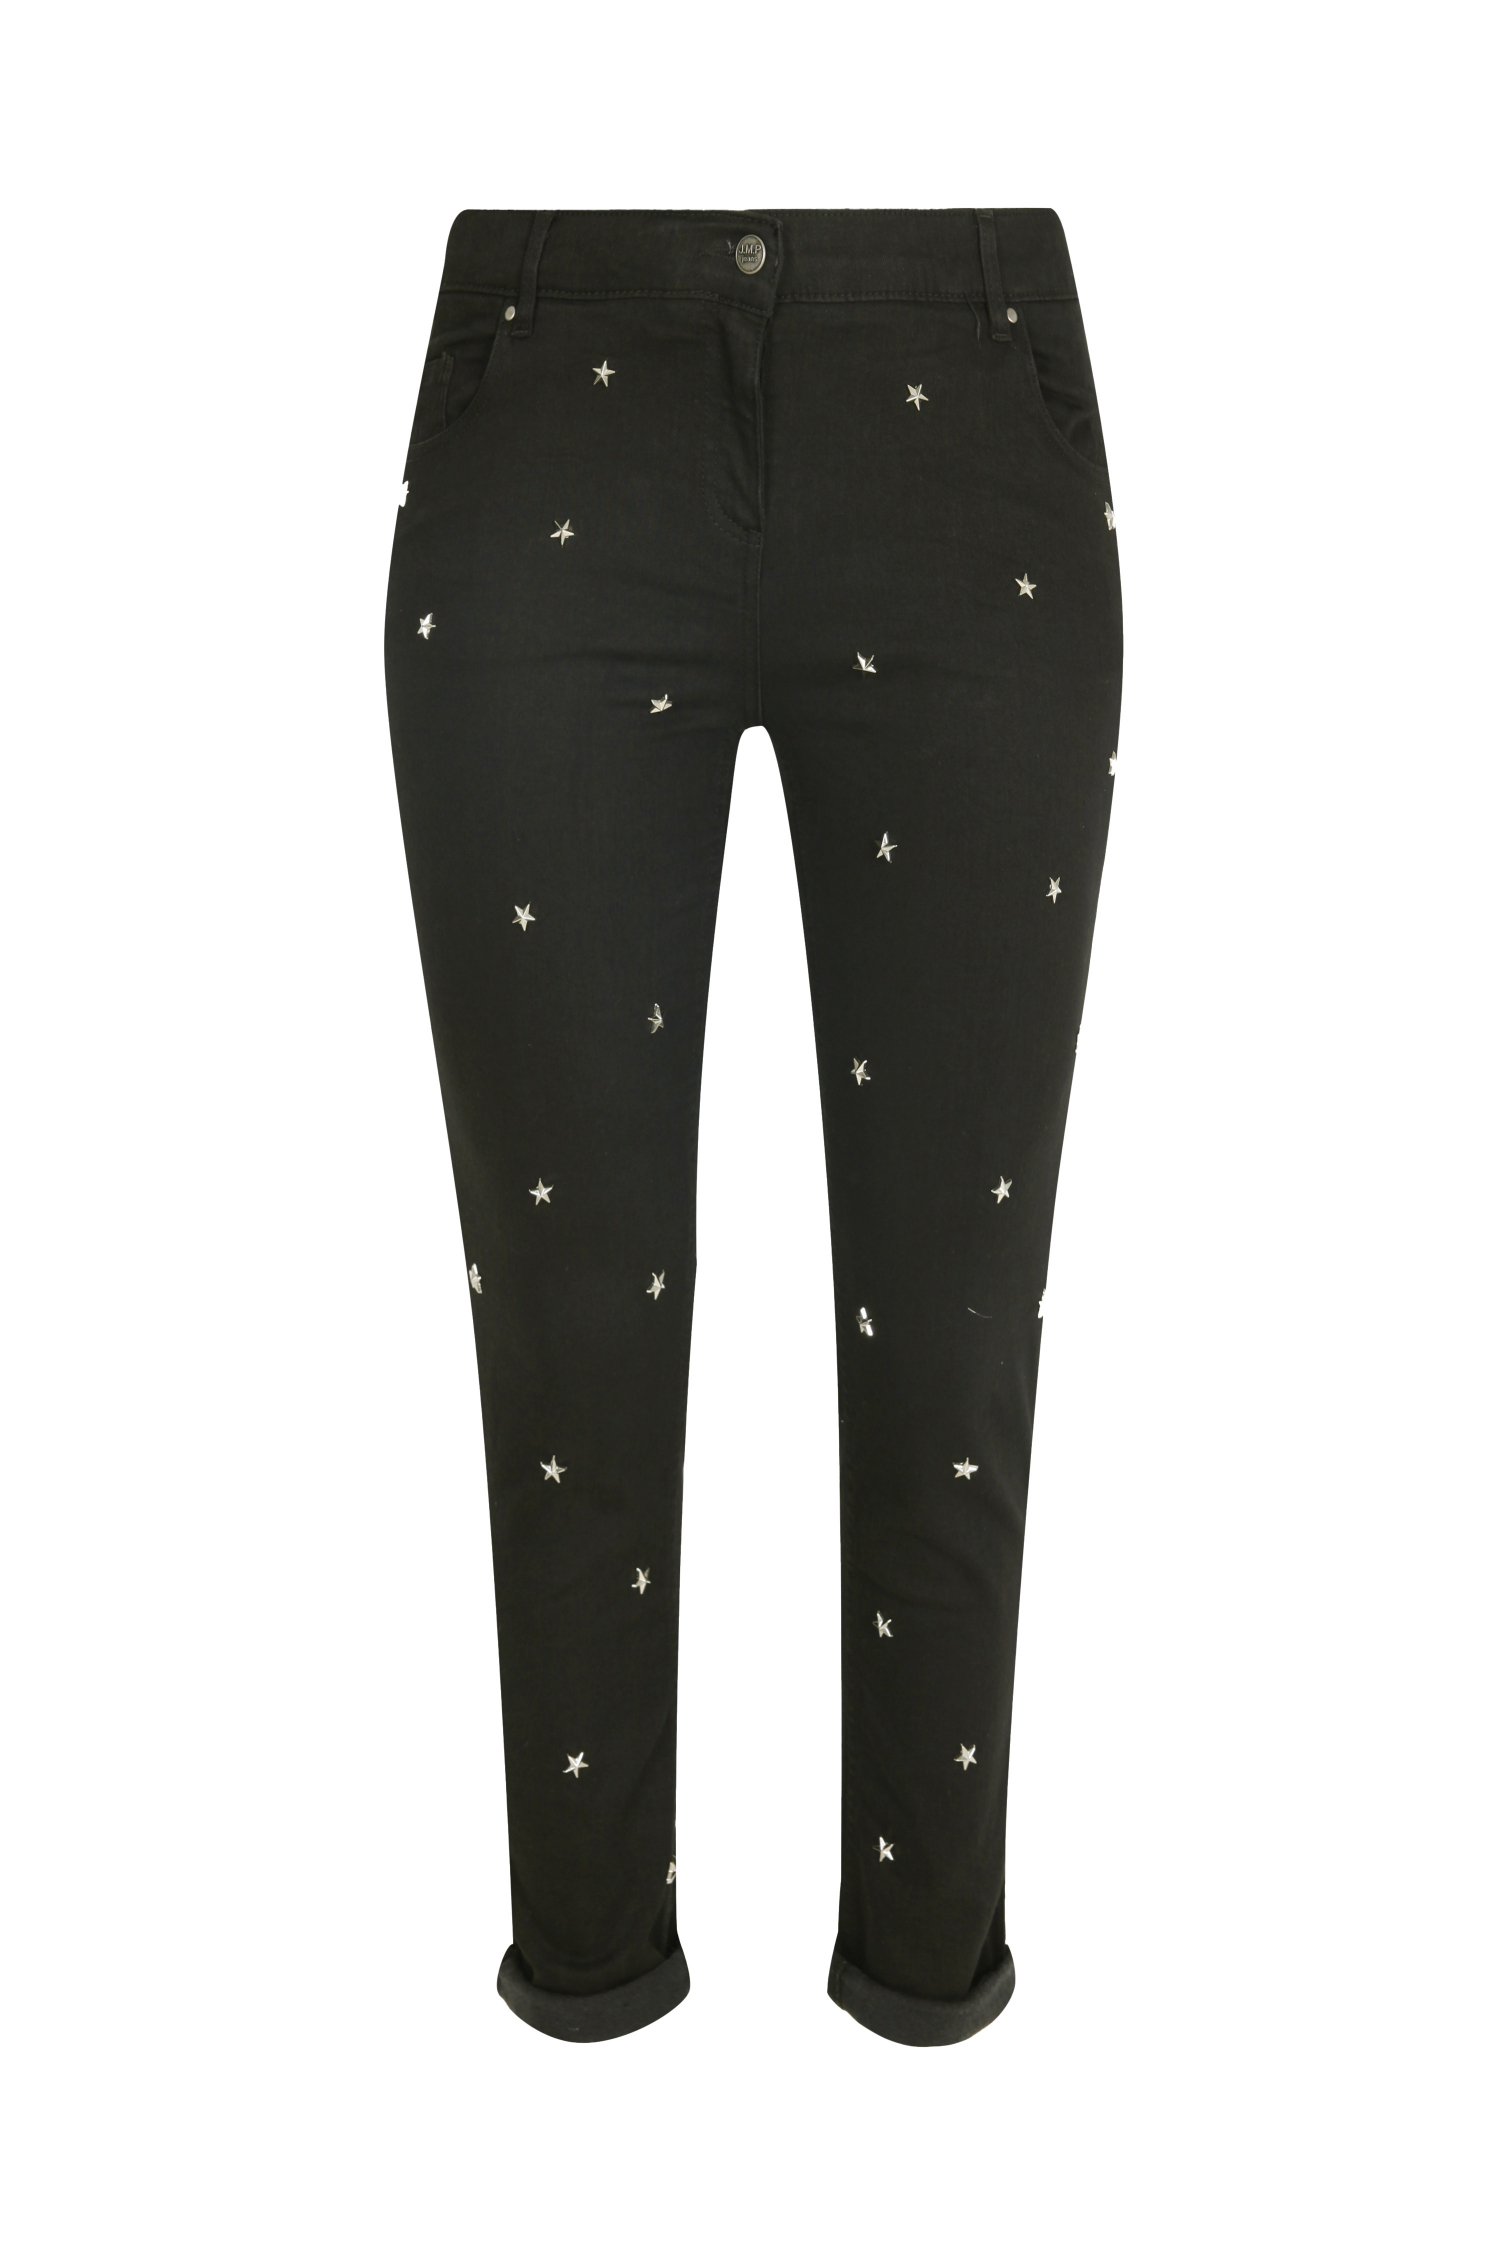 Black jeans with studs on the front